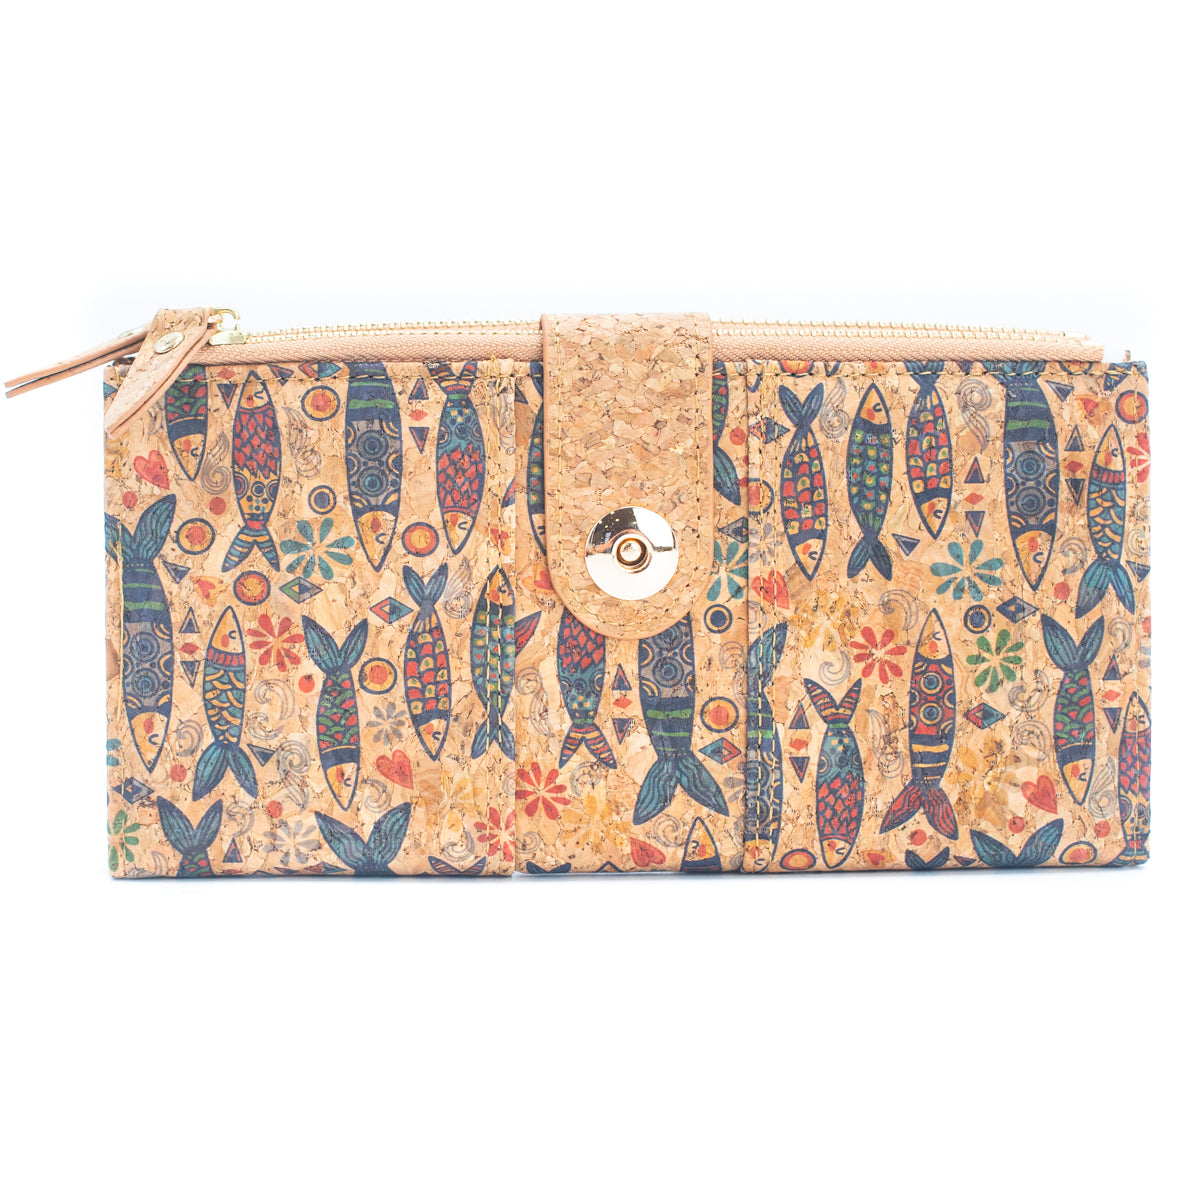 Long Cork Wallets w/ Floral Mosaic Patterns | THE CORK COLLECTION